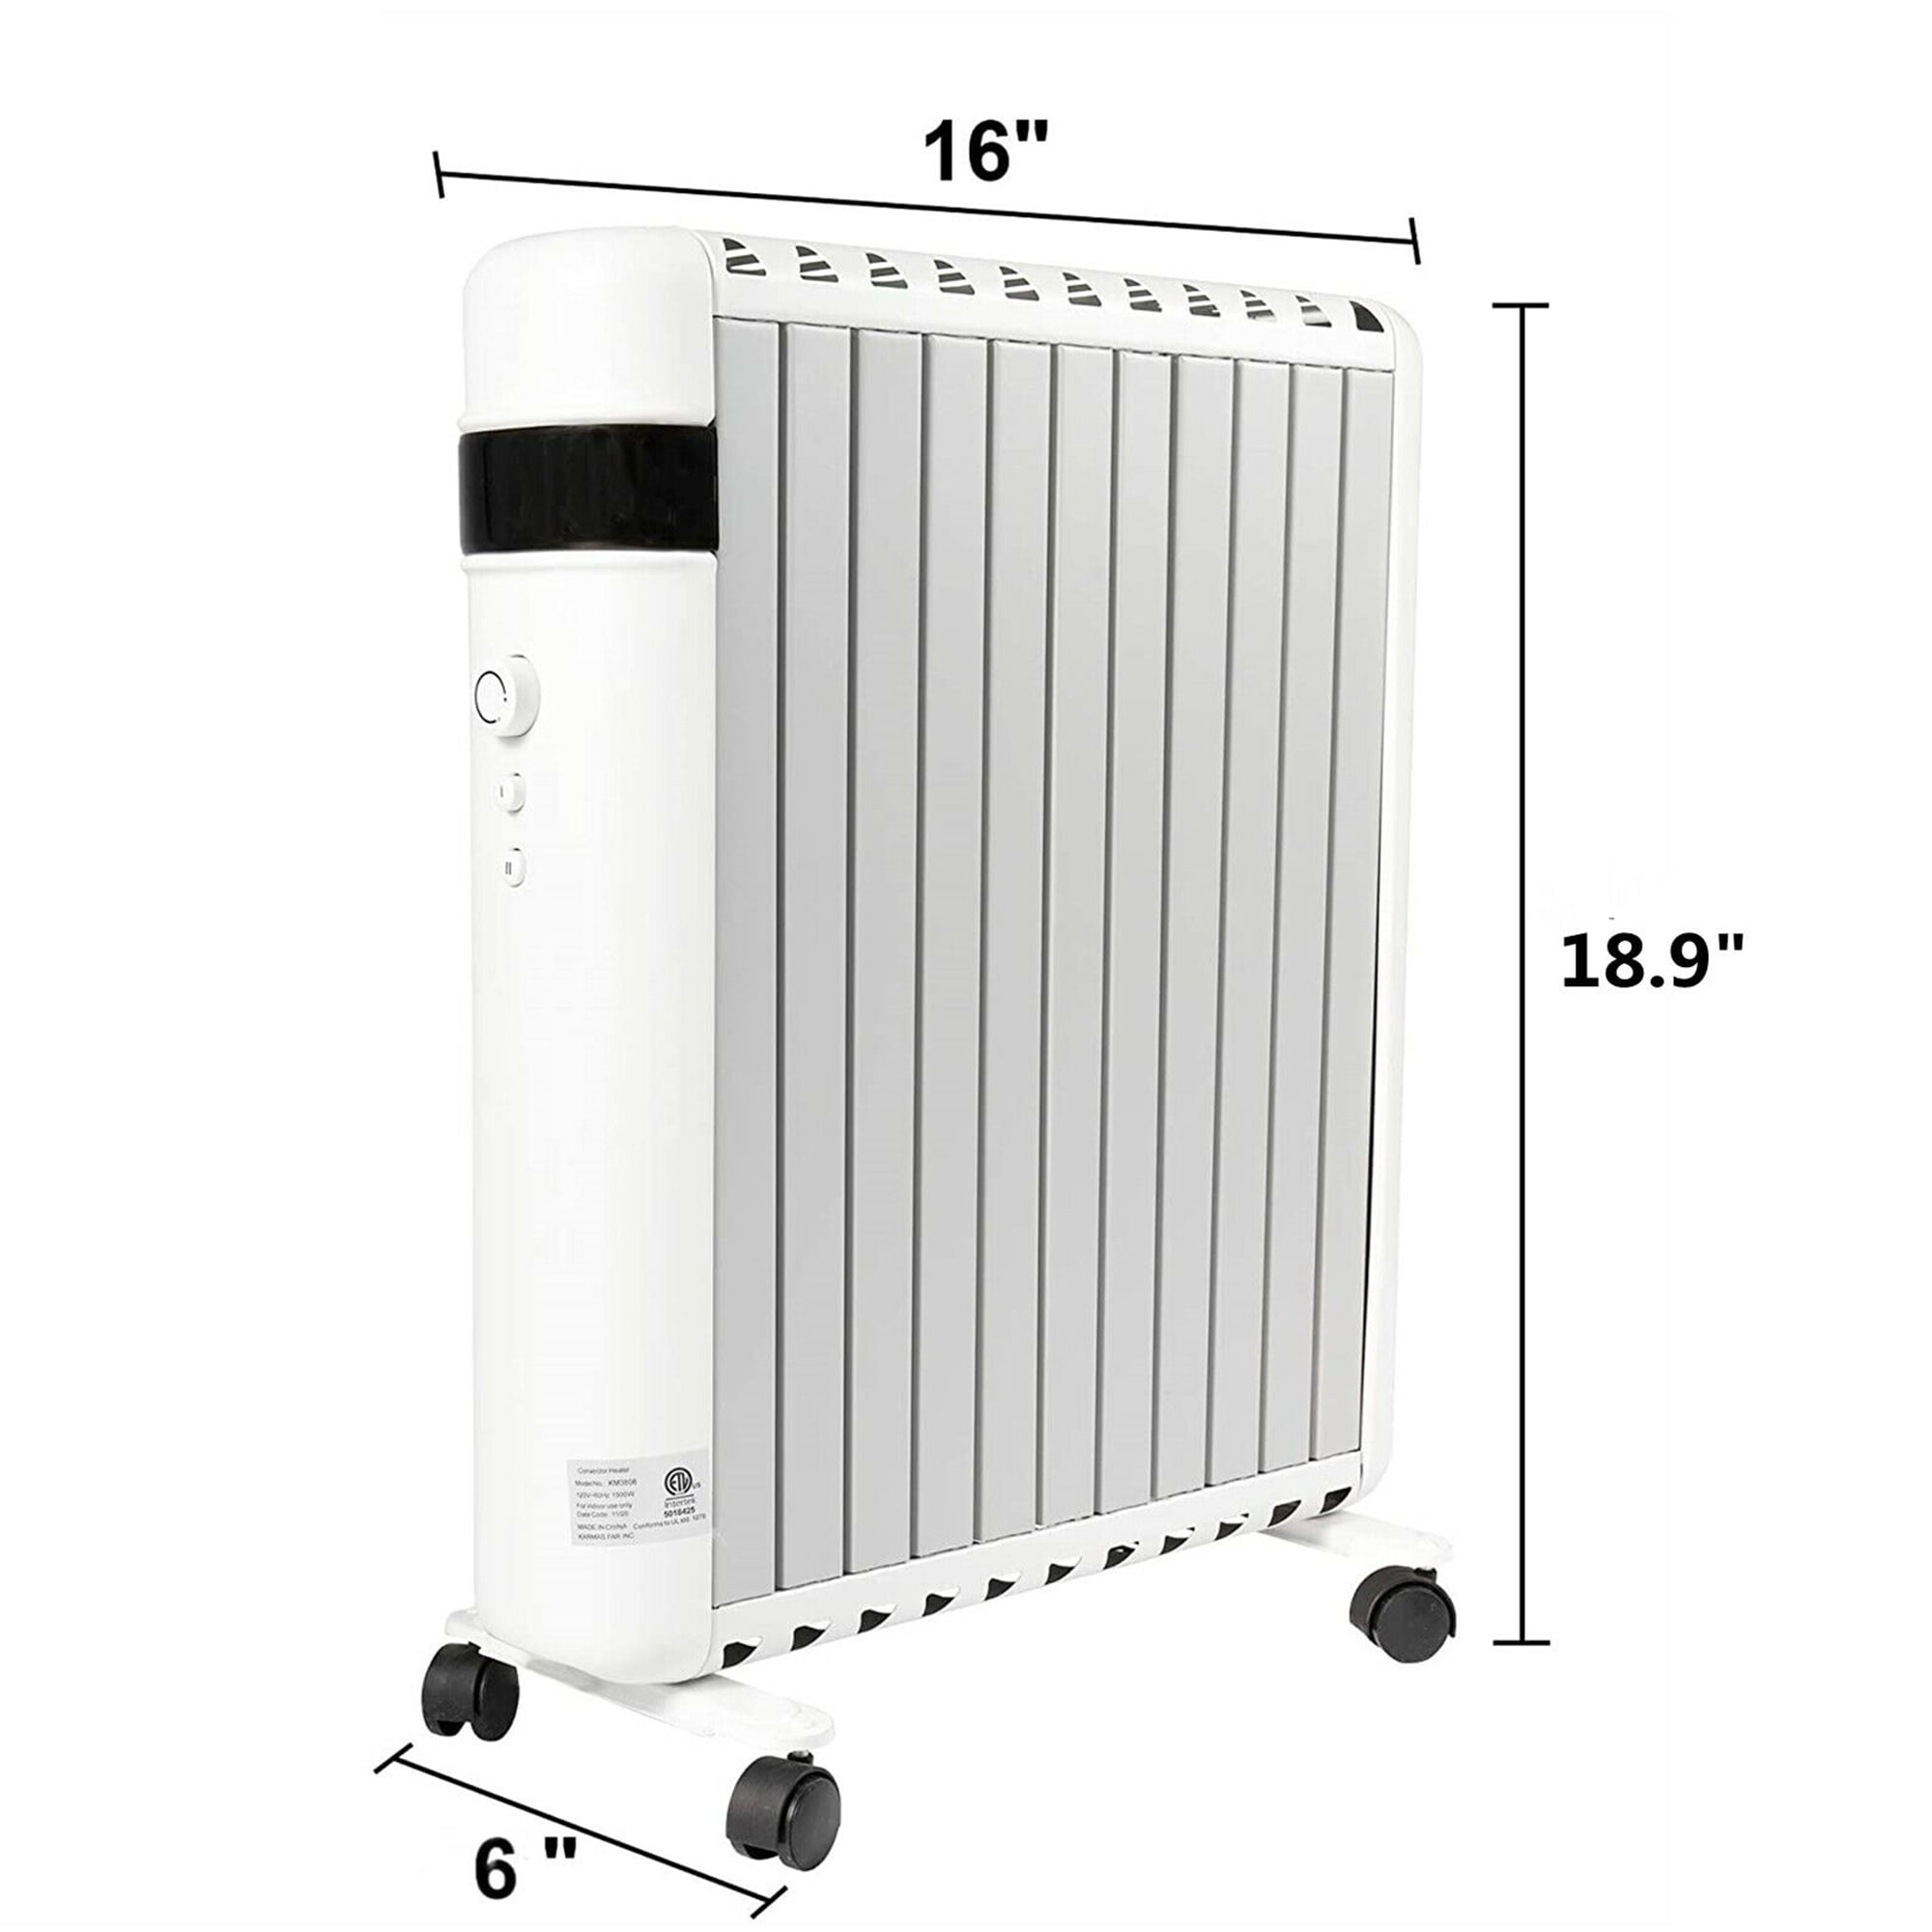 DODOING Radiator Space Oil Free Heater 750W / 1500W, Adjustable Thermostat, Tip-Over Protection, Electric Portable Heater with Remote for Indoor Use - Walmart.com